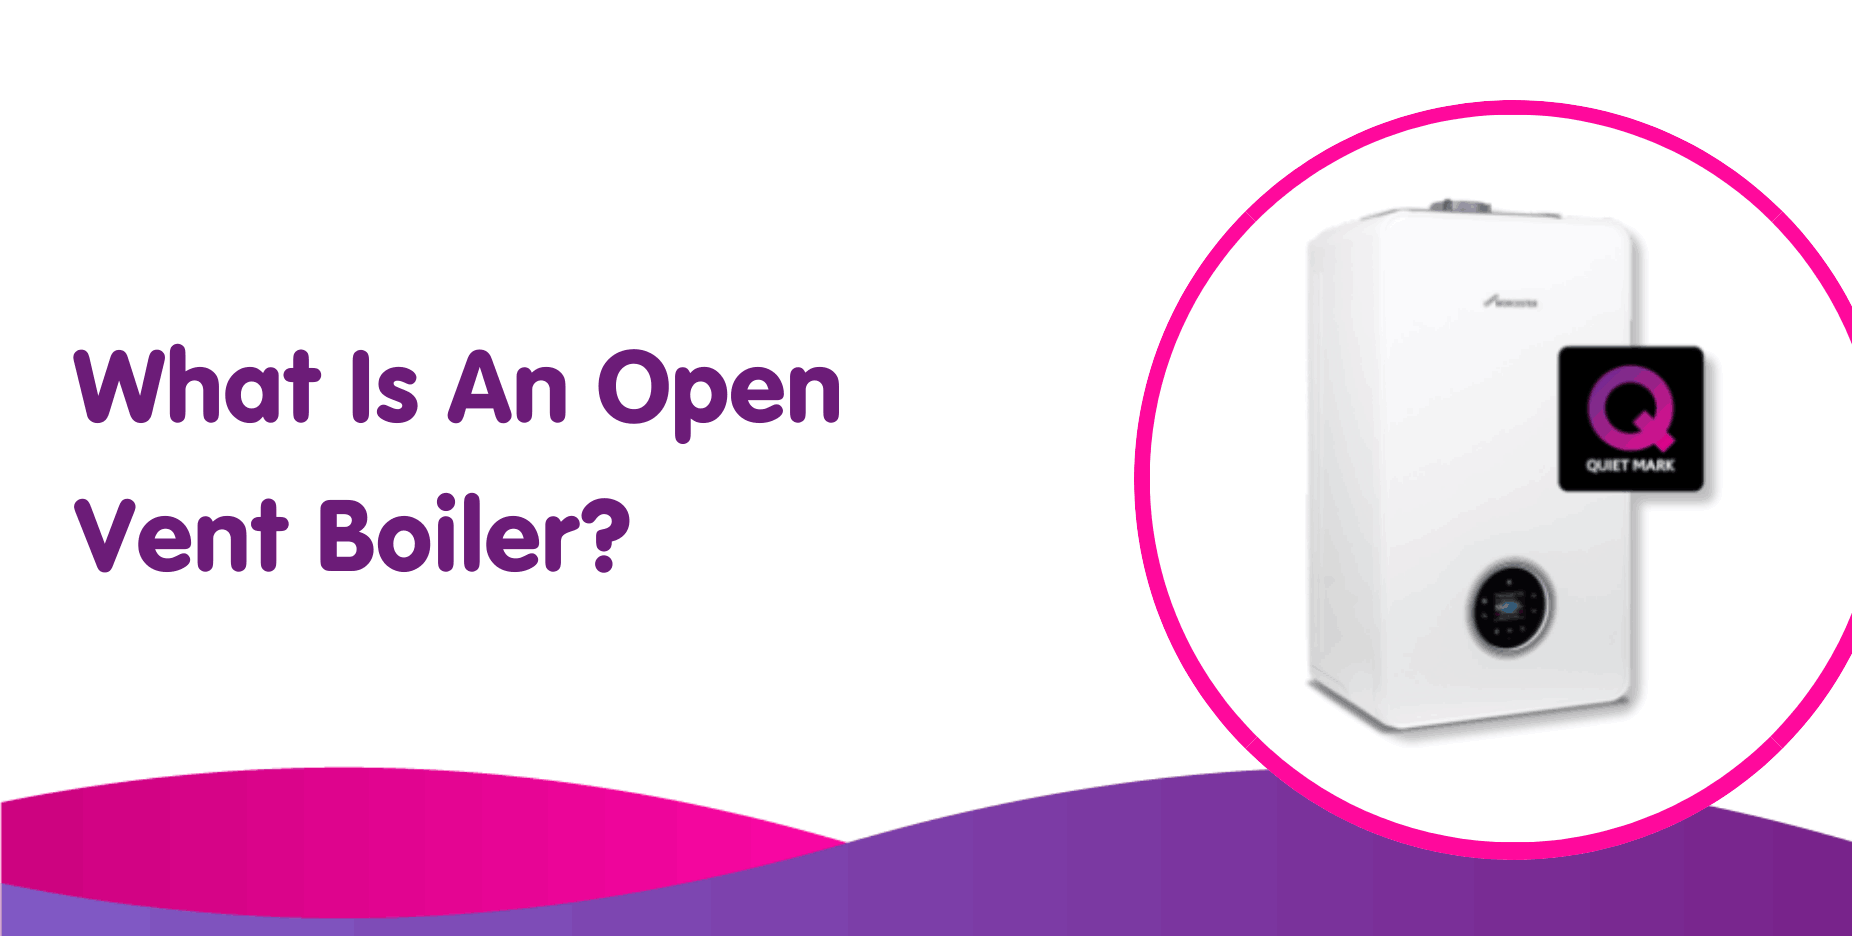 What Is An Open Vent Boiler?